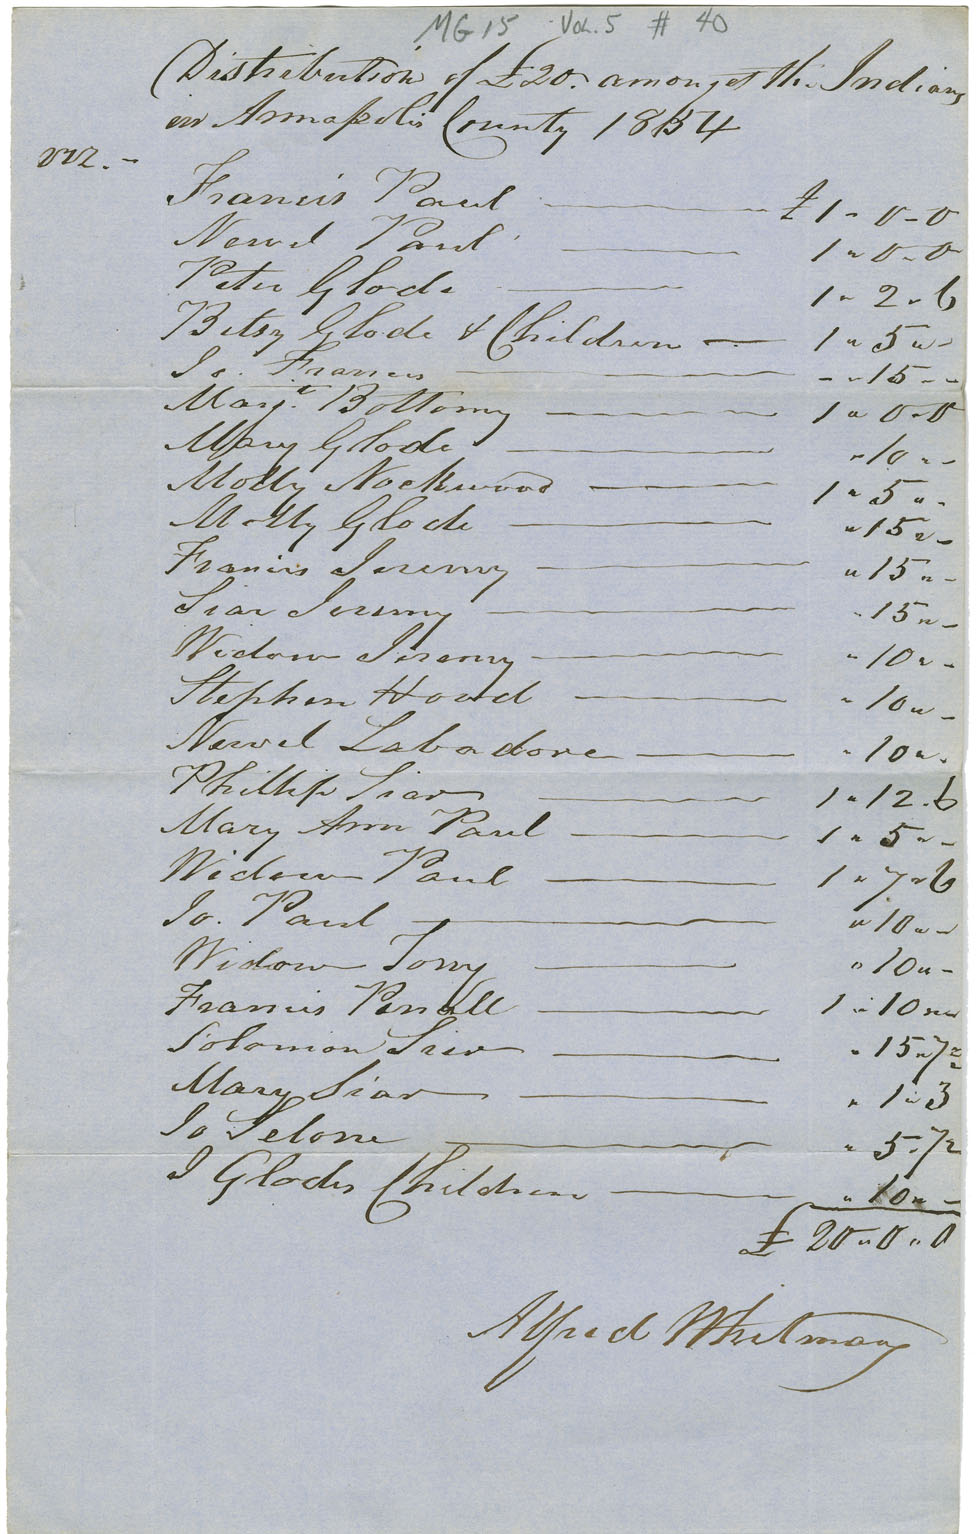 Account of the expenditure of monies among the Mi'kmaq of Annapolis County. Names mentioned.